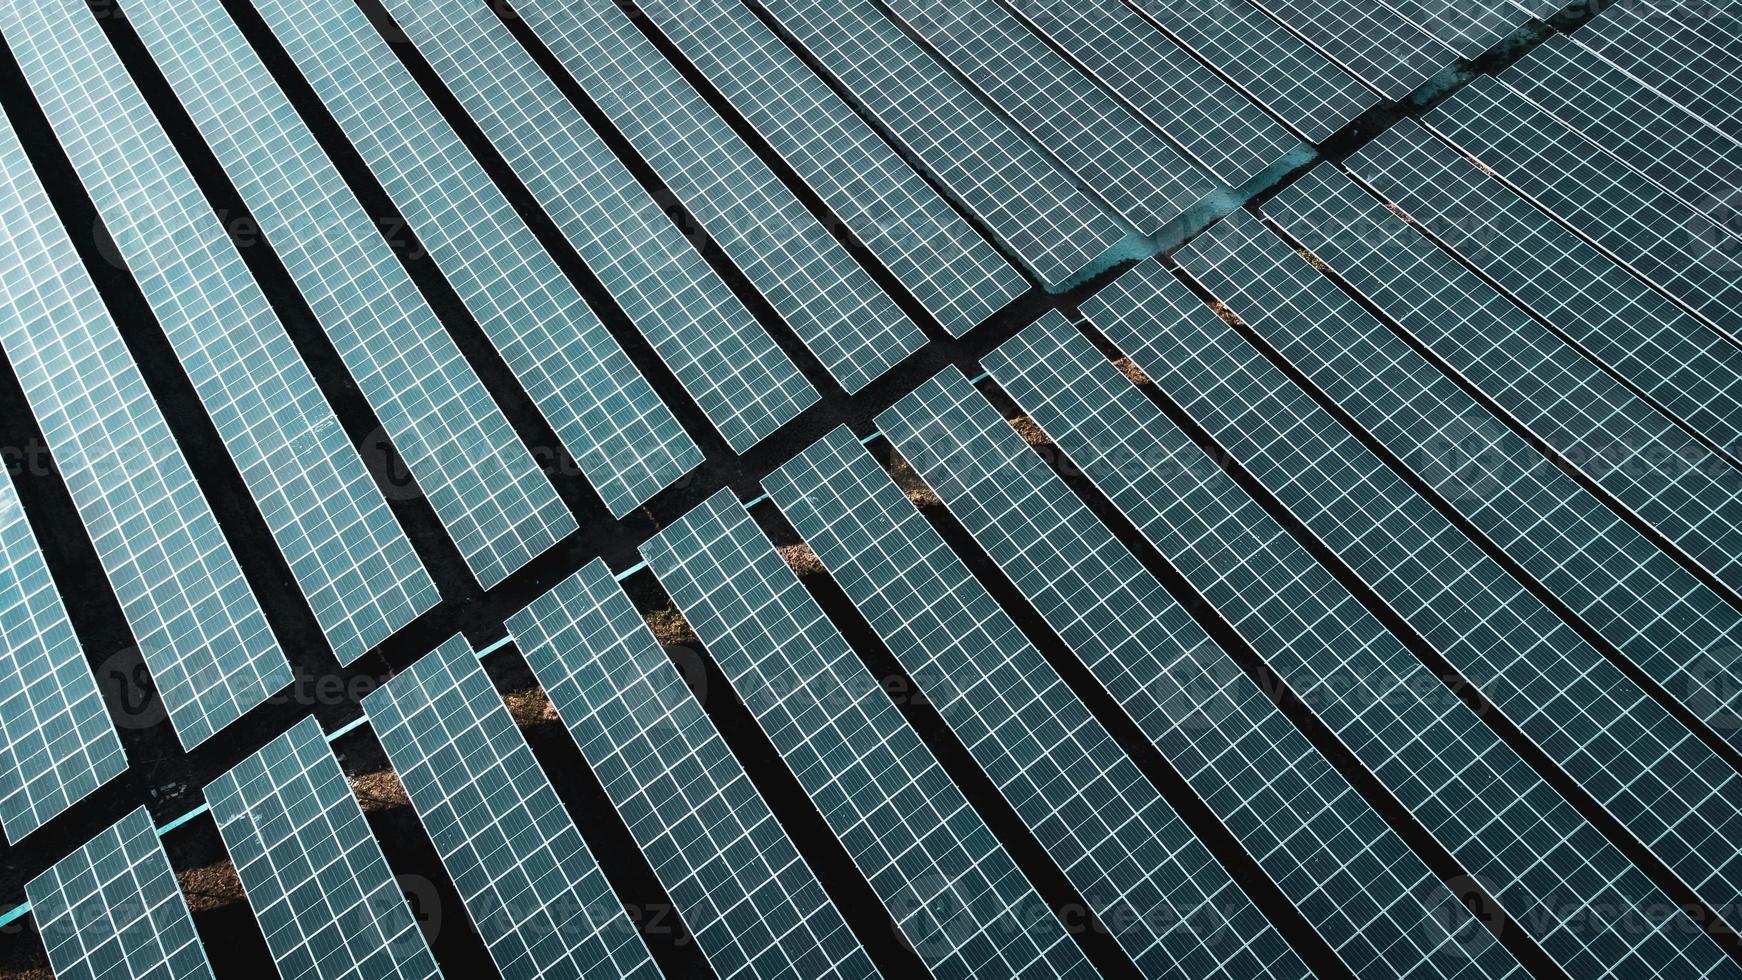 Solar cell panel from aerial view. Photo landscape of a solar farm producing clean energy.